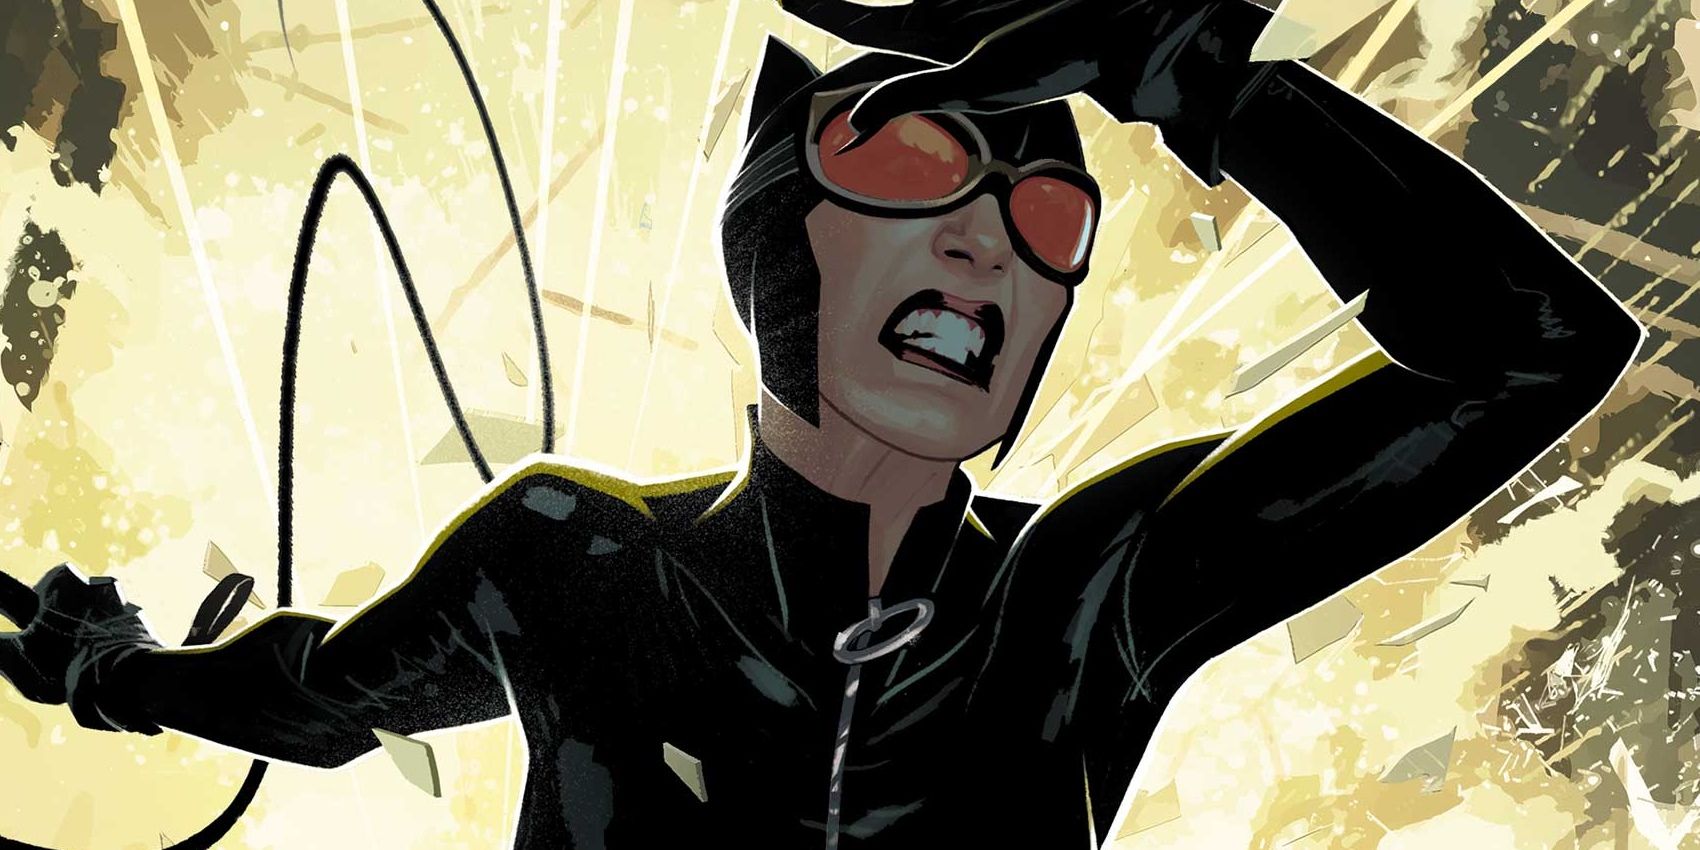 15 Actresses Who Could Play Catwoman In Gotham City Sirens